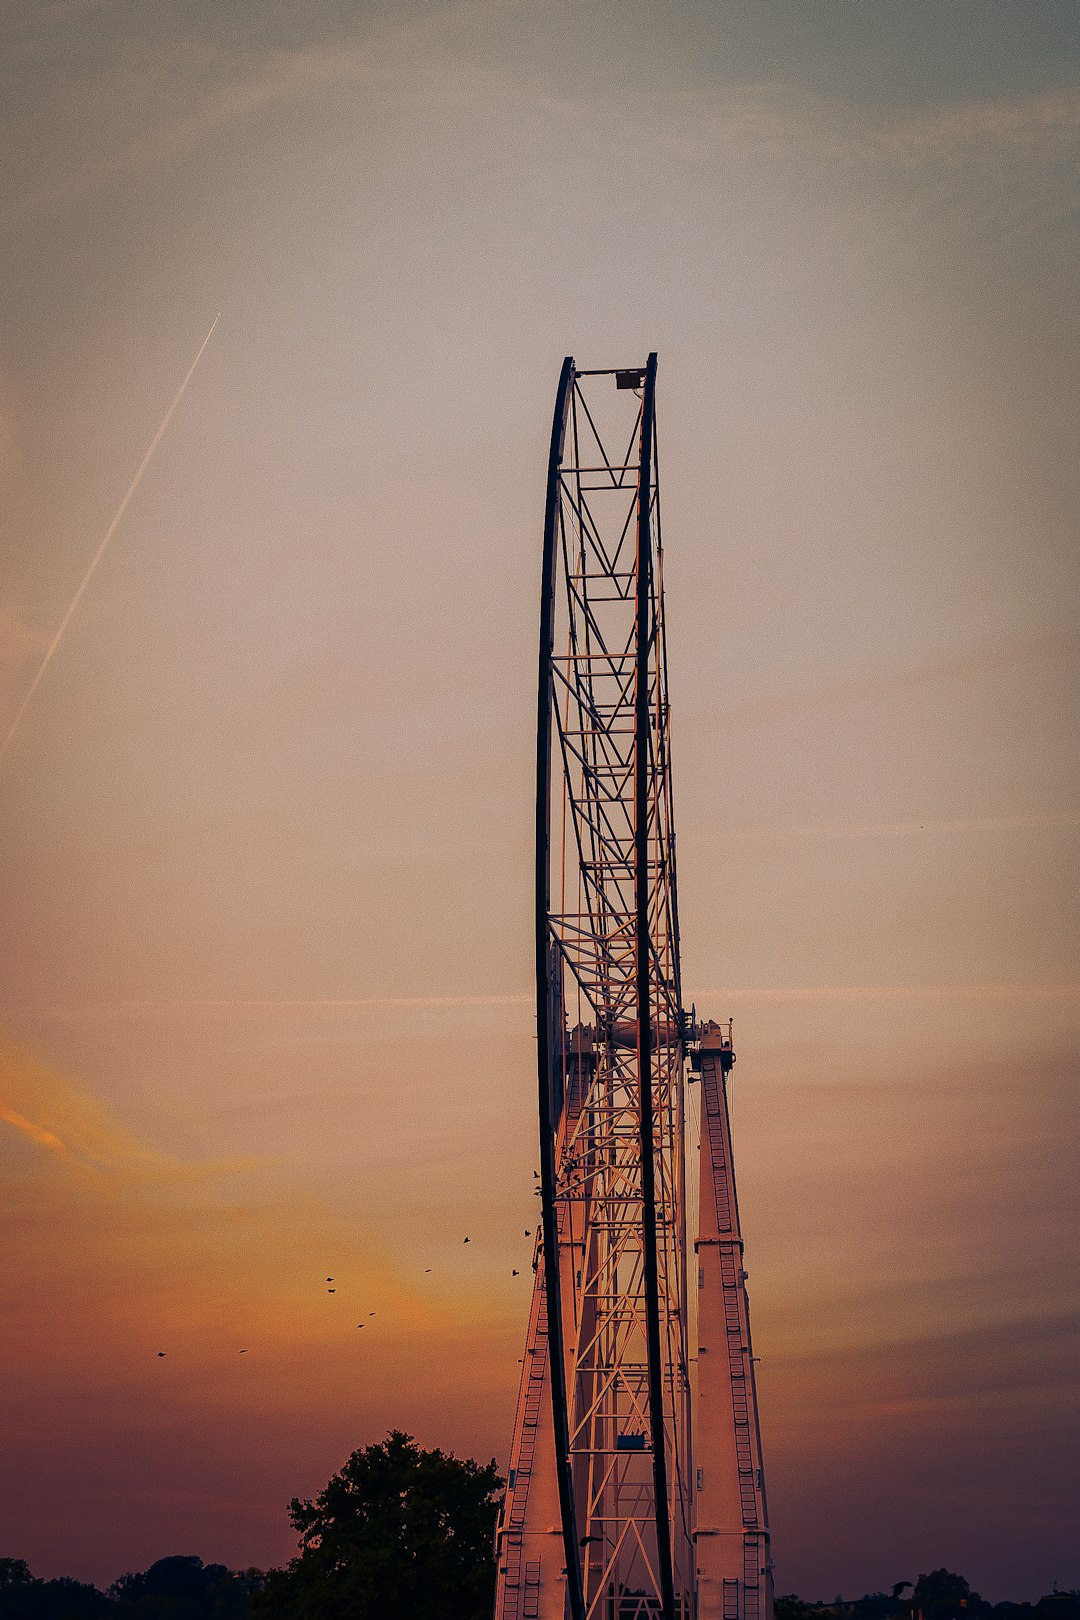 red metal tower during sunset